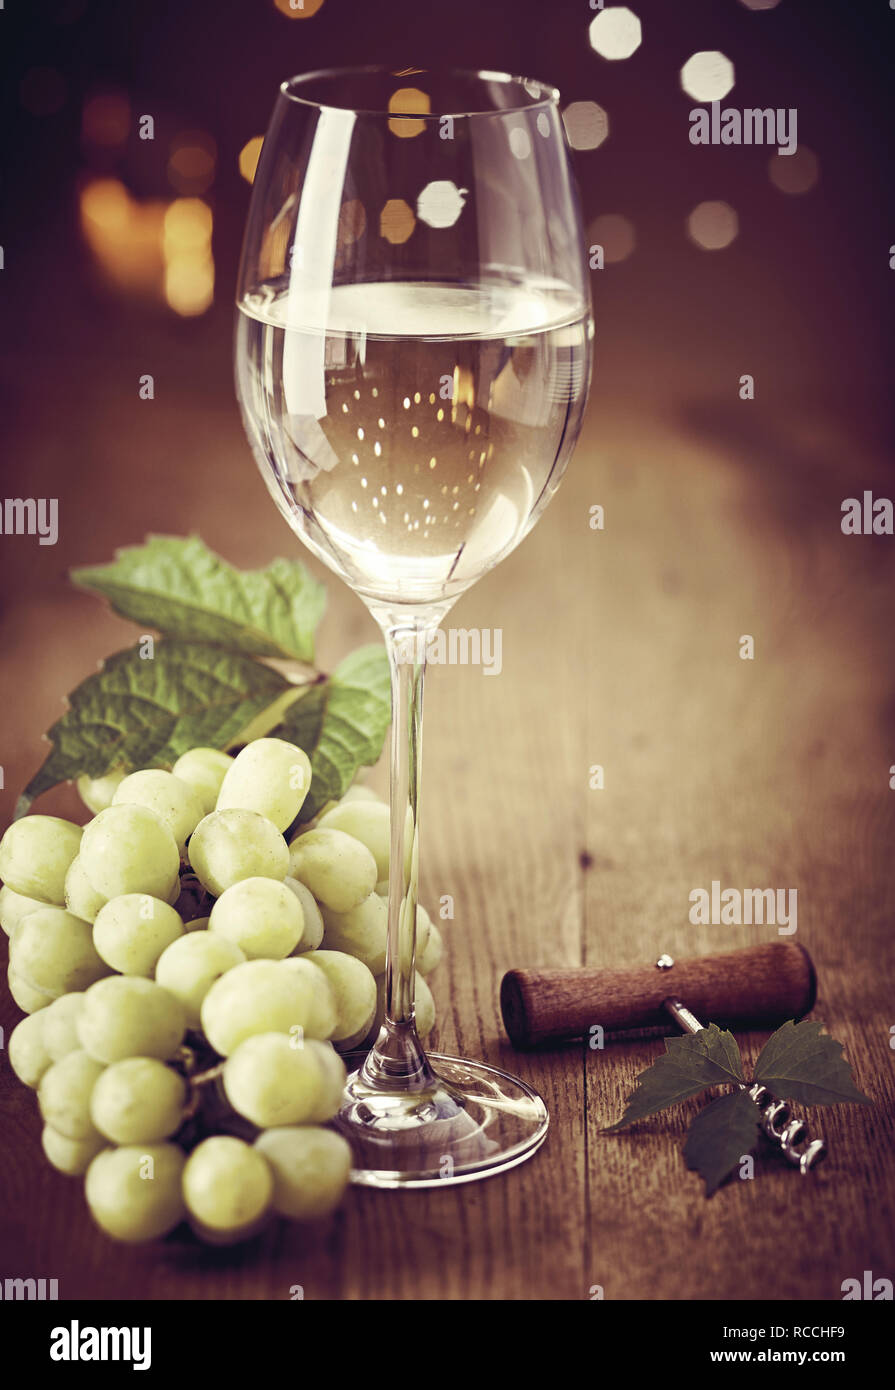 Elegant wineglass of white wine with bunch of fresh green grapes and bottle opener on a wooden table with a bokeh of sparkling party lights Stock Photo